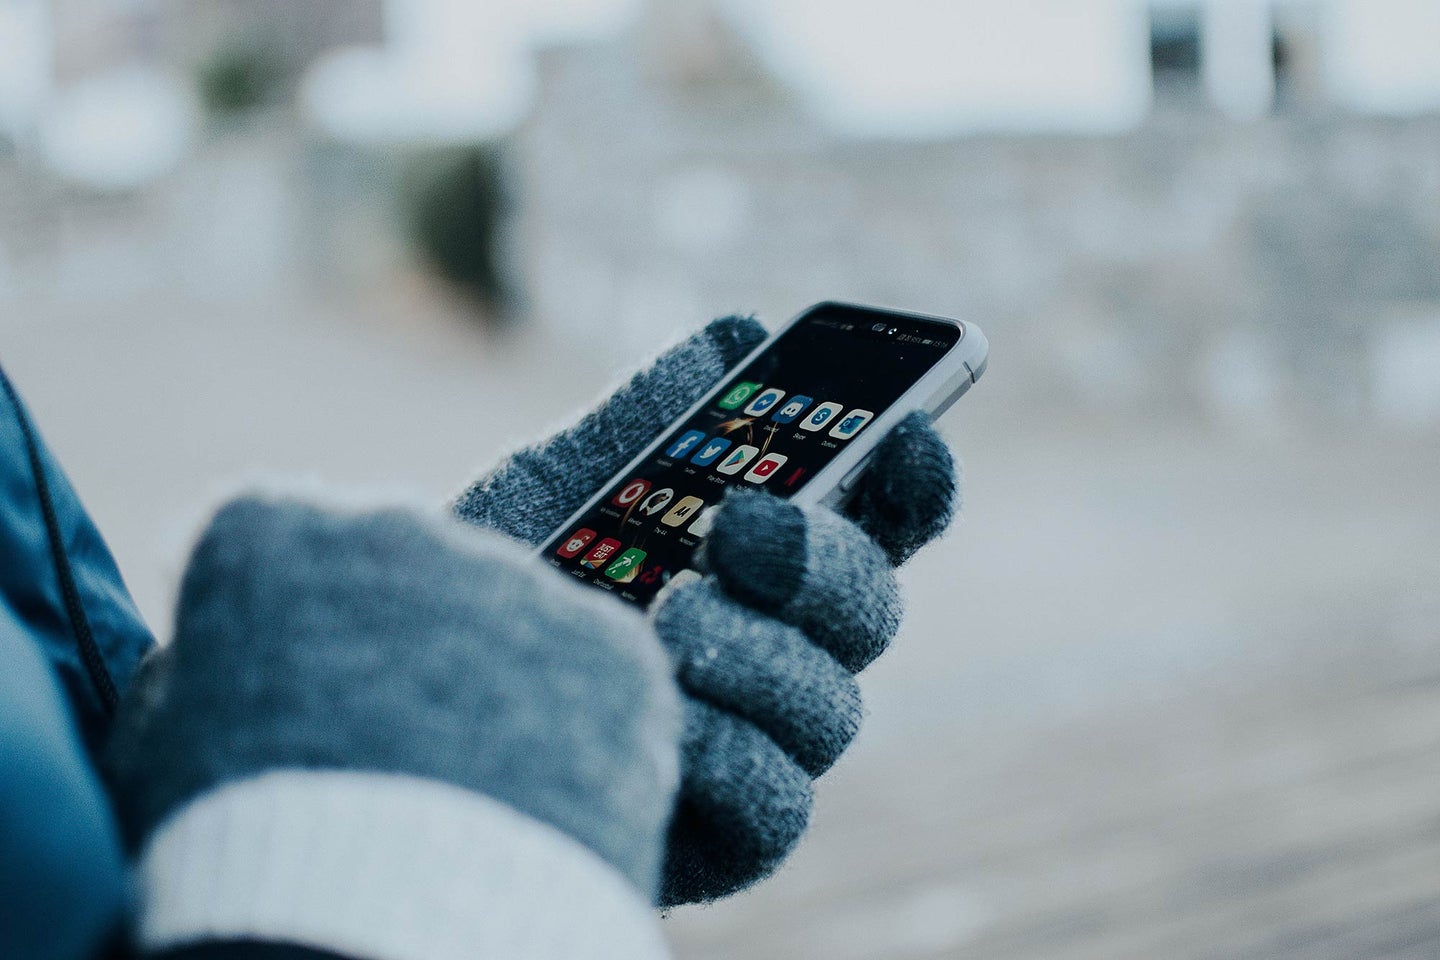 Person wearing gloves using an iPhone